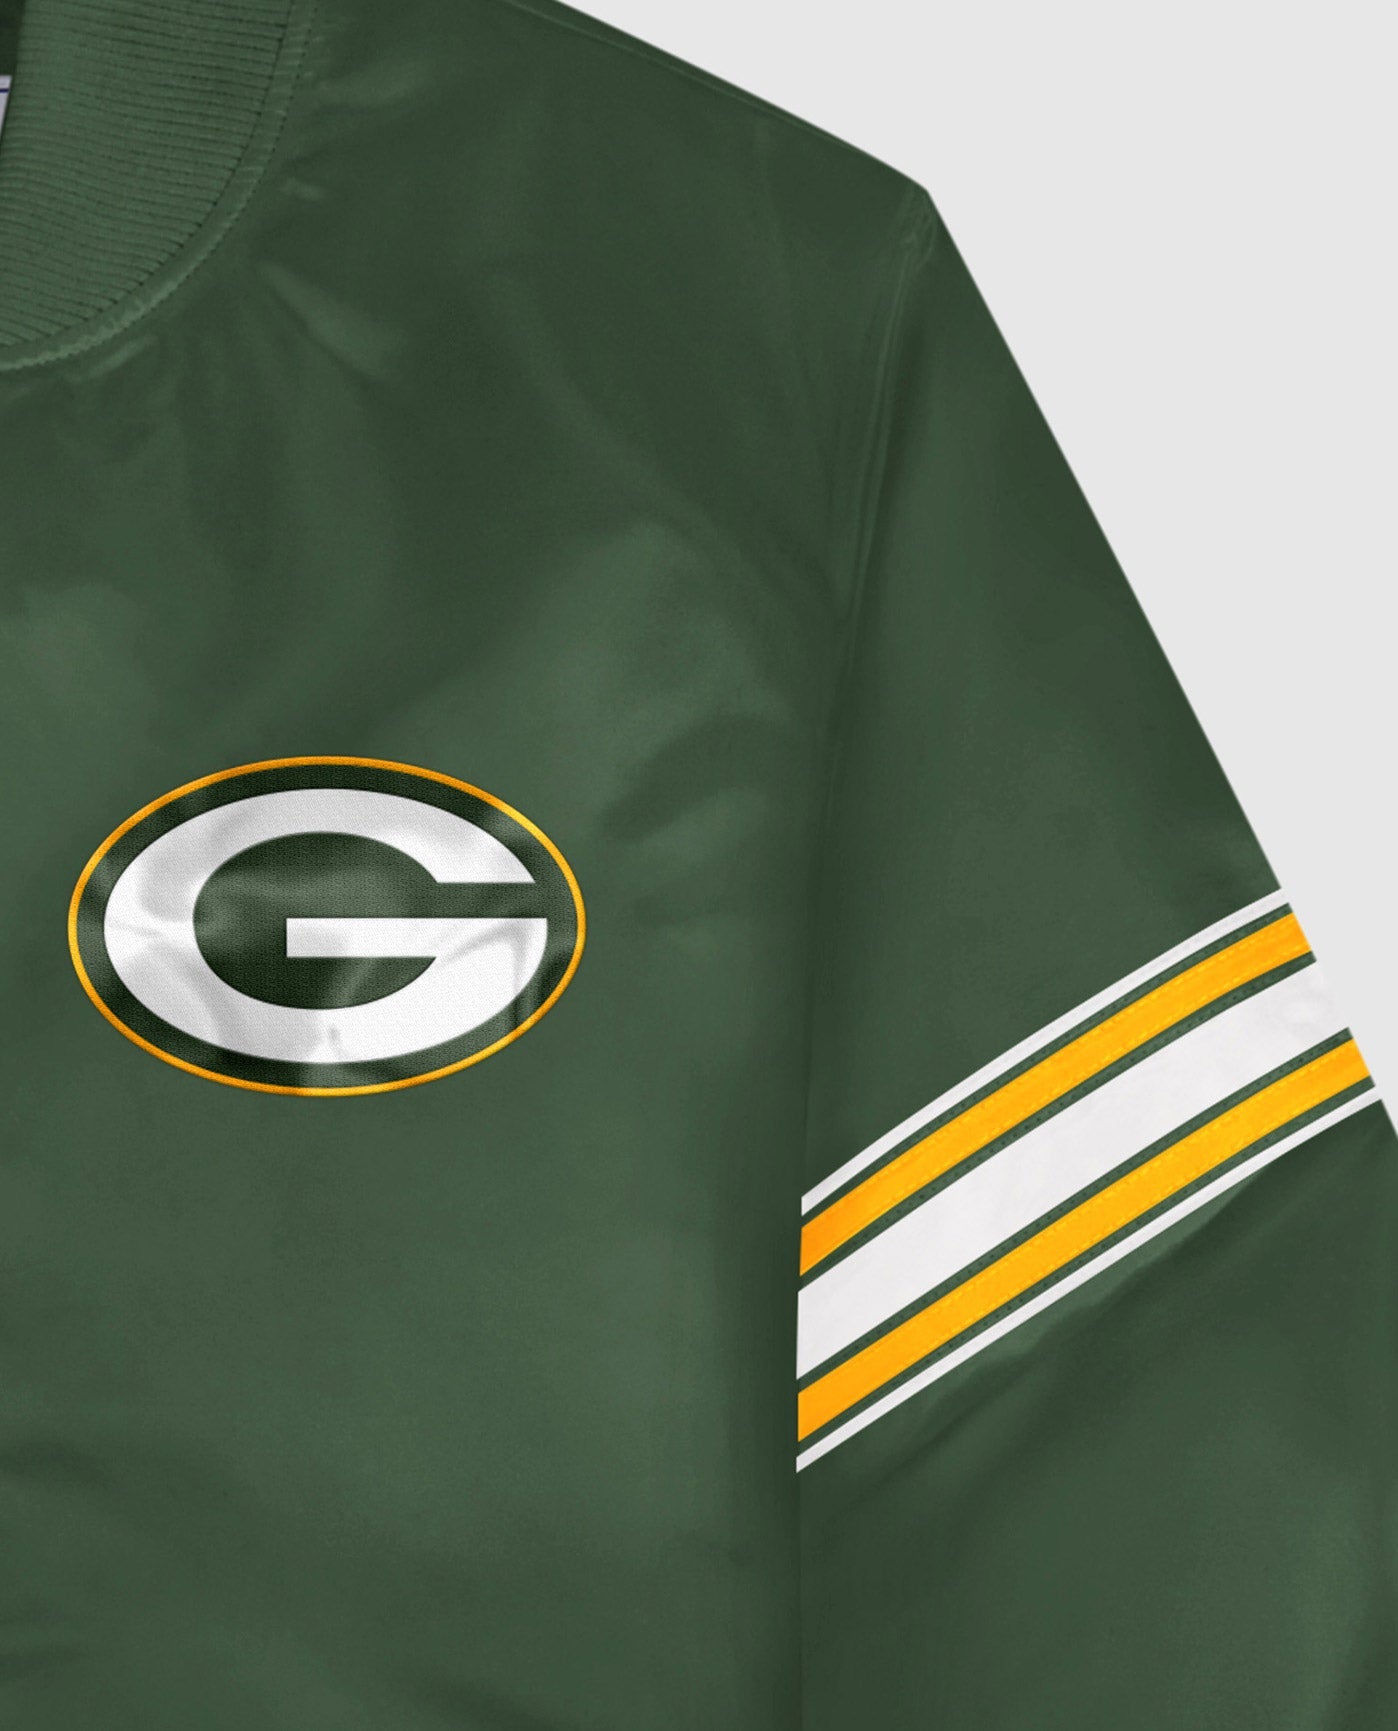 Green Bay Packers Twill Applique Logo And Color Stripe Sleeve | Packers Green